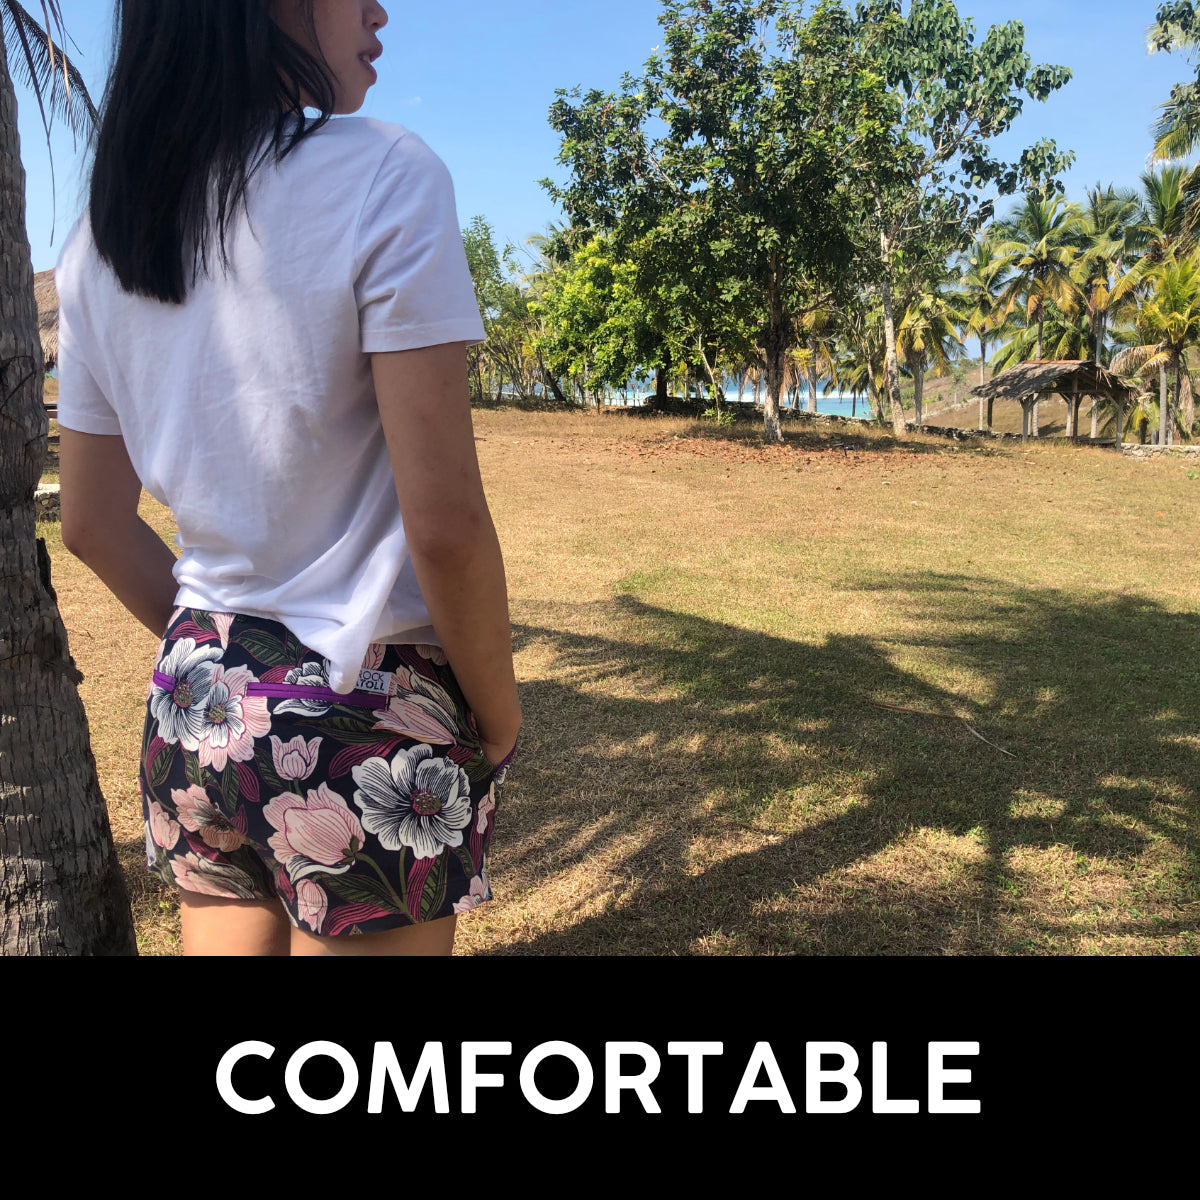 Soft Comfortable Regular Fit Summer Chino Shorts for Women and Ladies. Going Out Shorts in All-Over Prints and Bold Colors